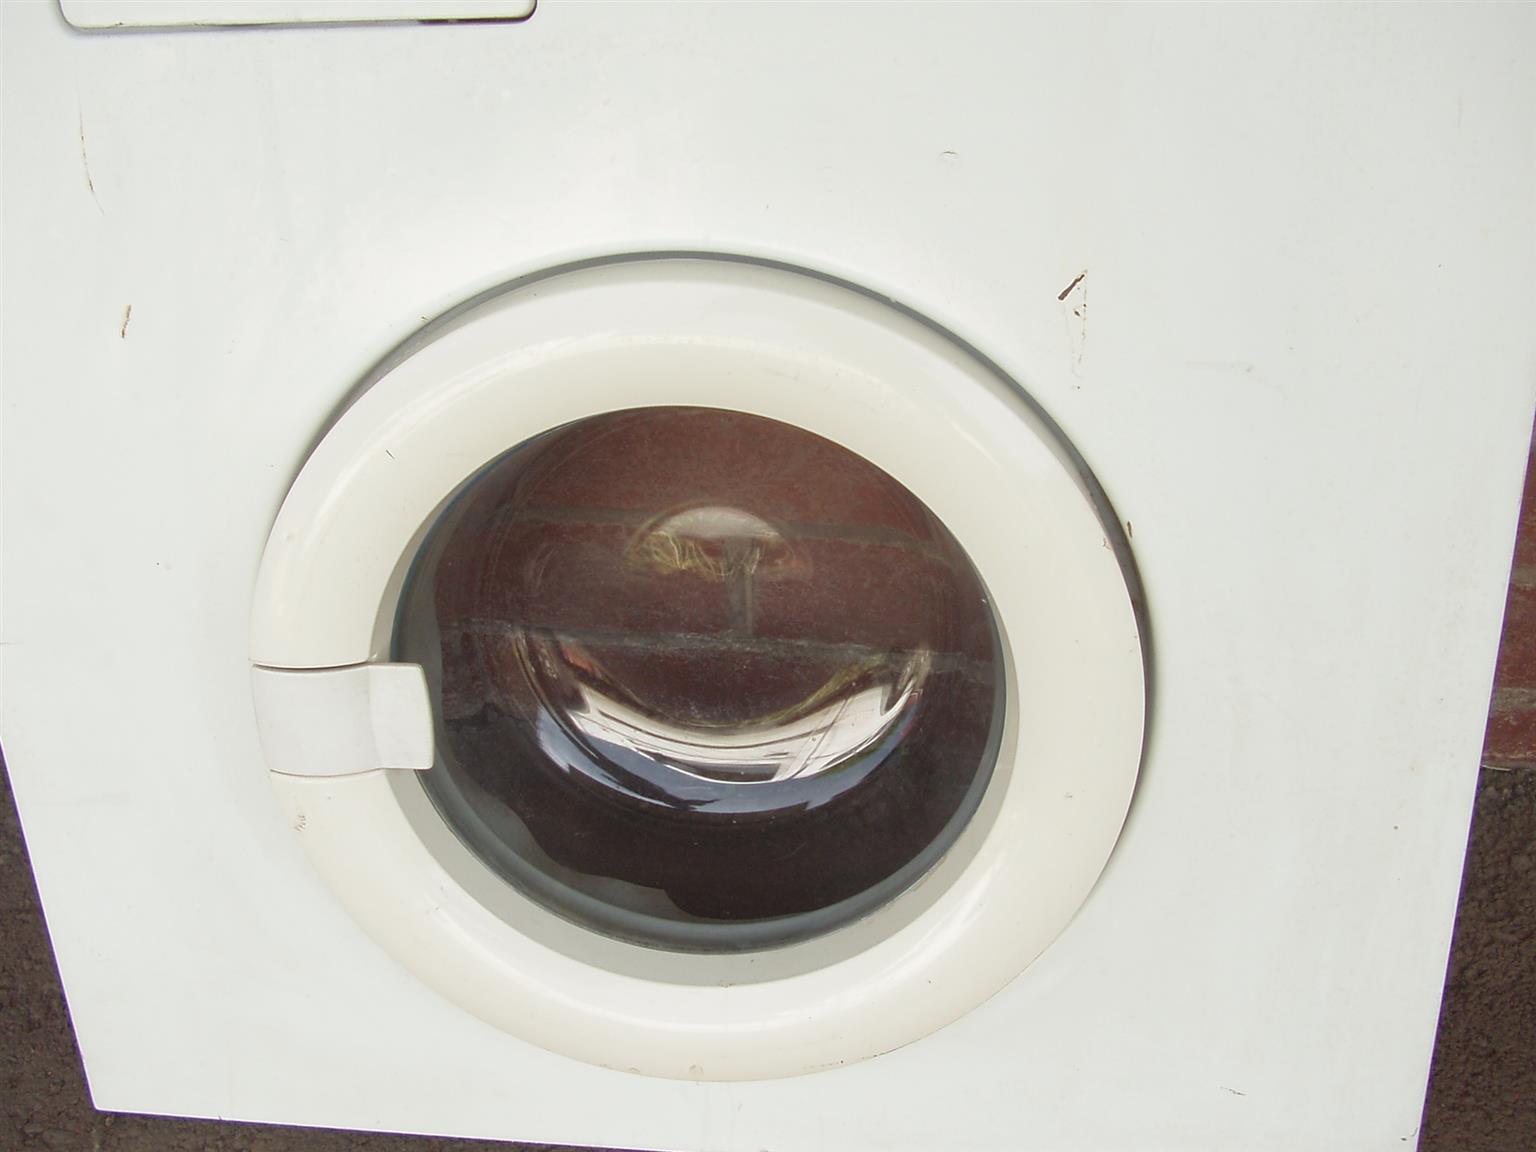 Defy Automaid Spares - washing Machine Door only 